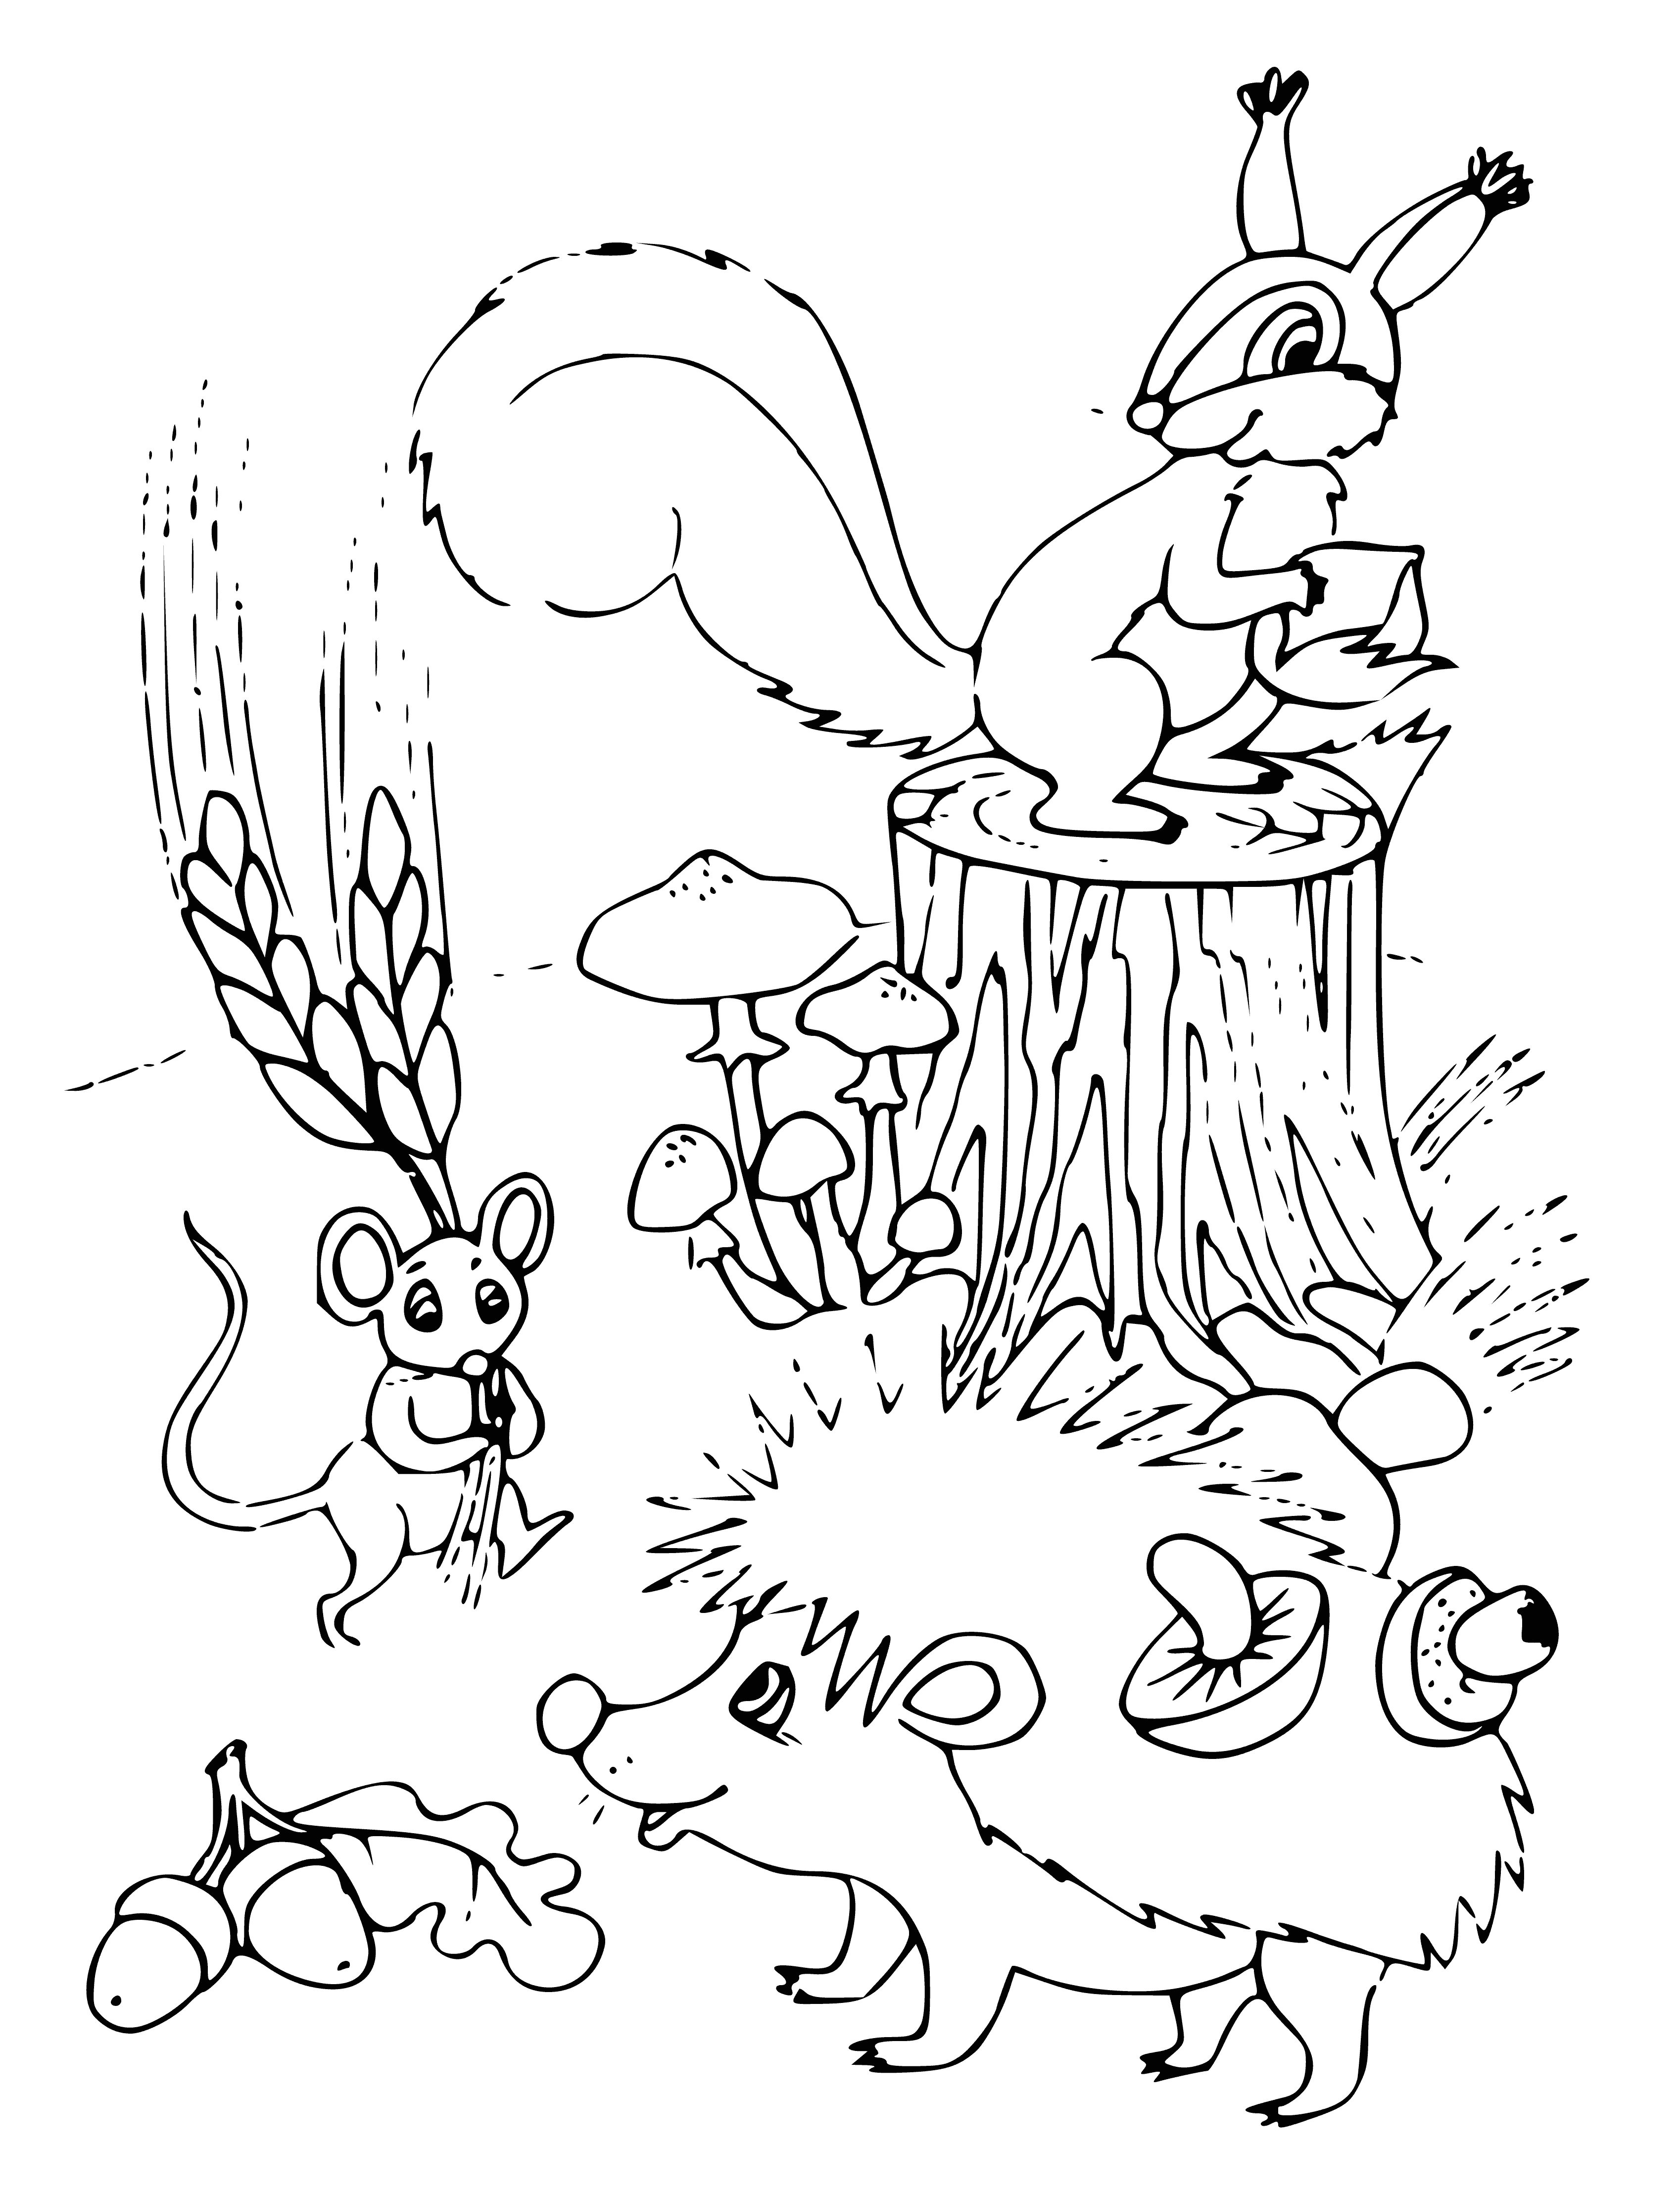 The animals are stocking up for the winter coloring page